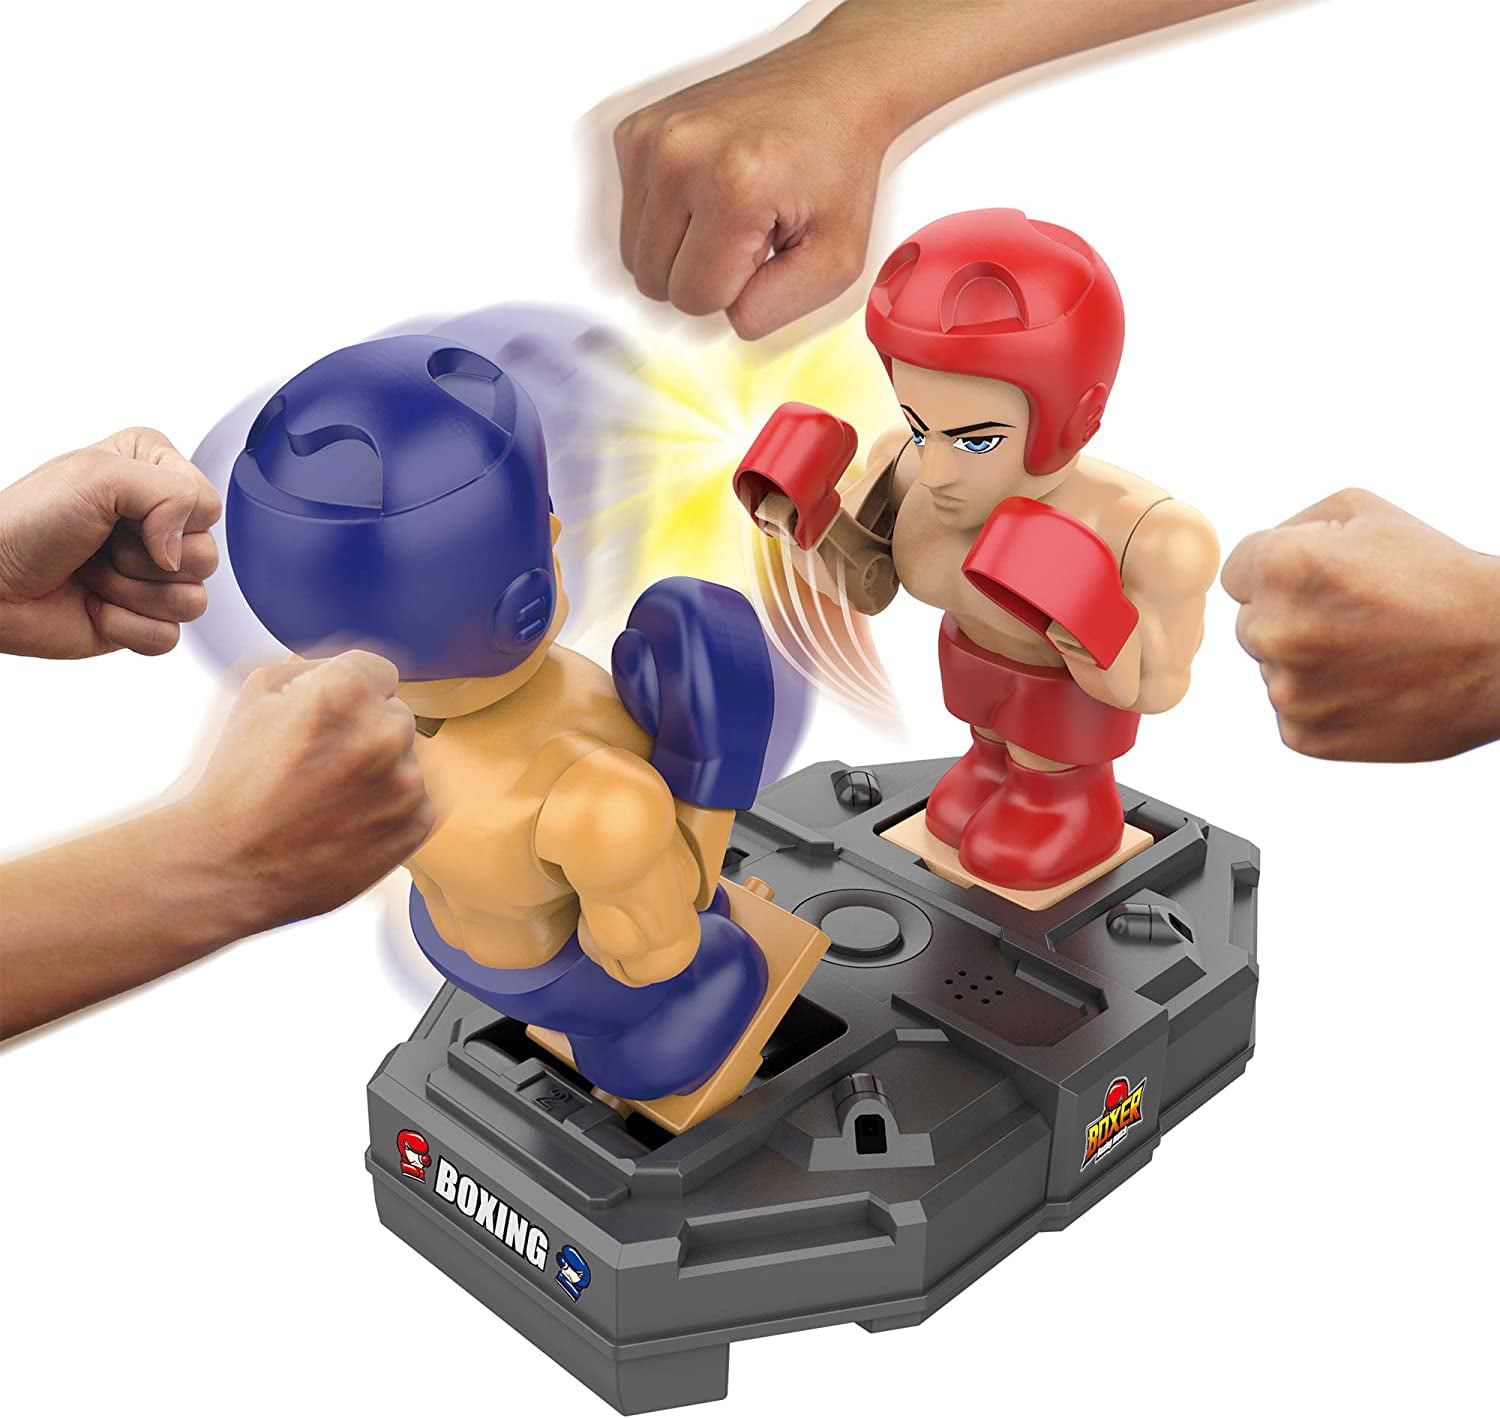 Details about   Control Sensor Remote Robot Boxing Infrared Boxing Fight Match New Kid Toy Gift 